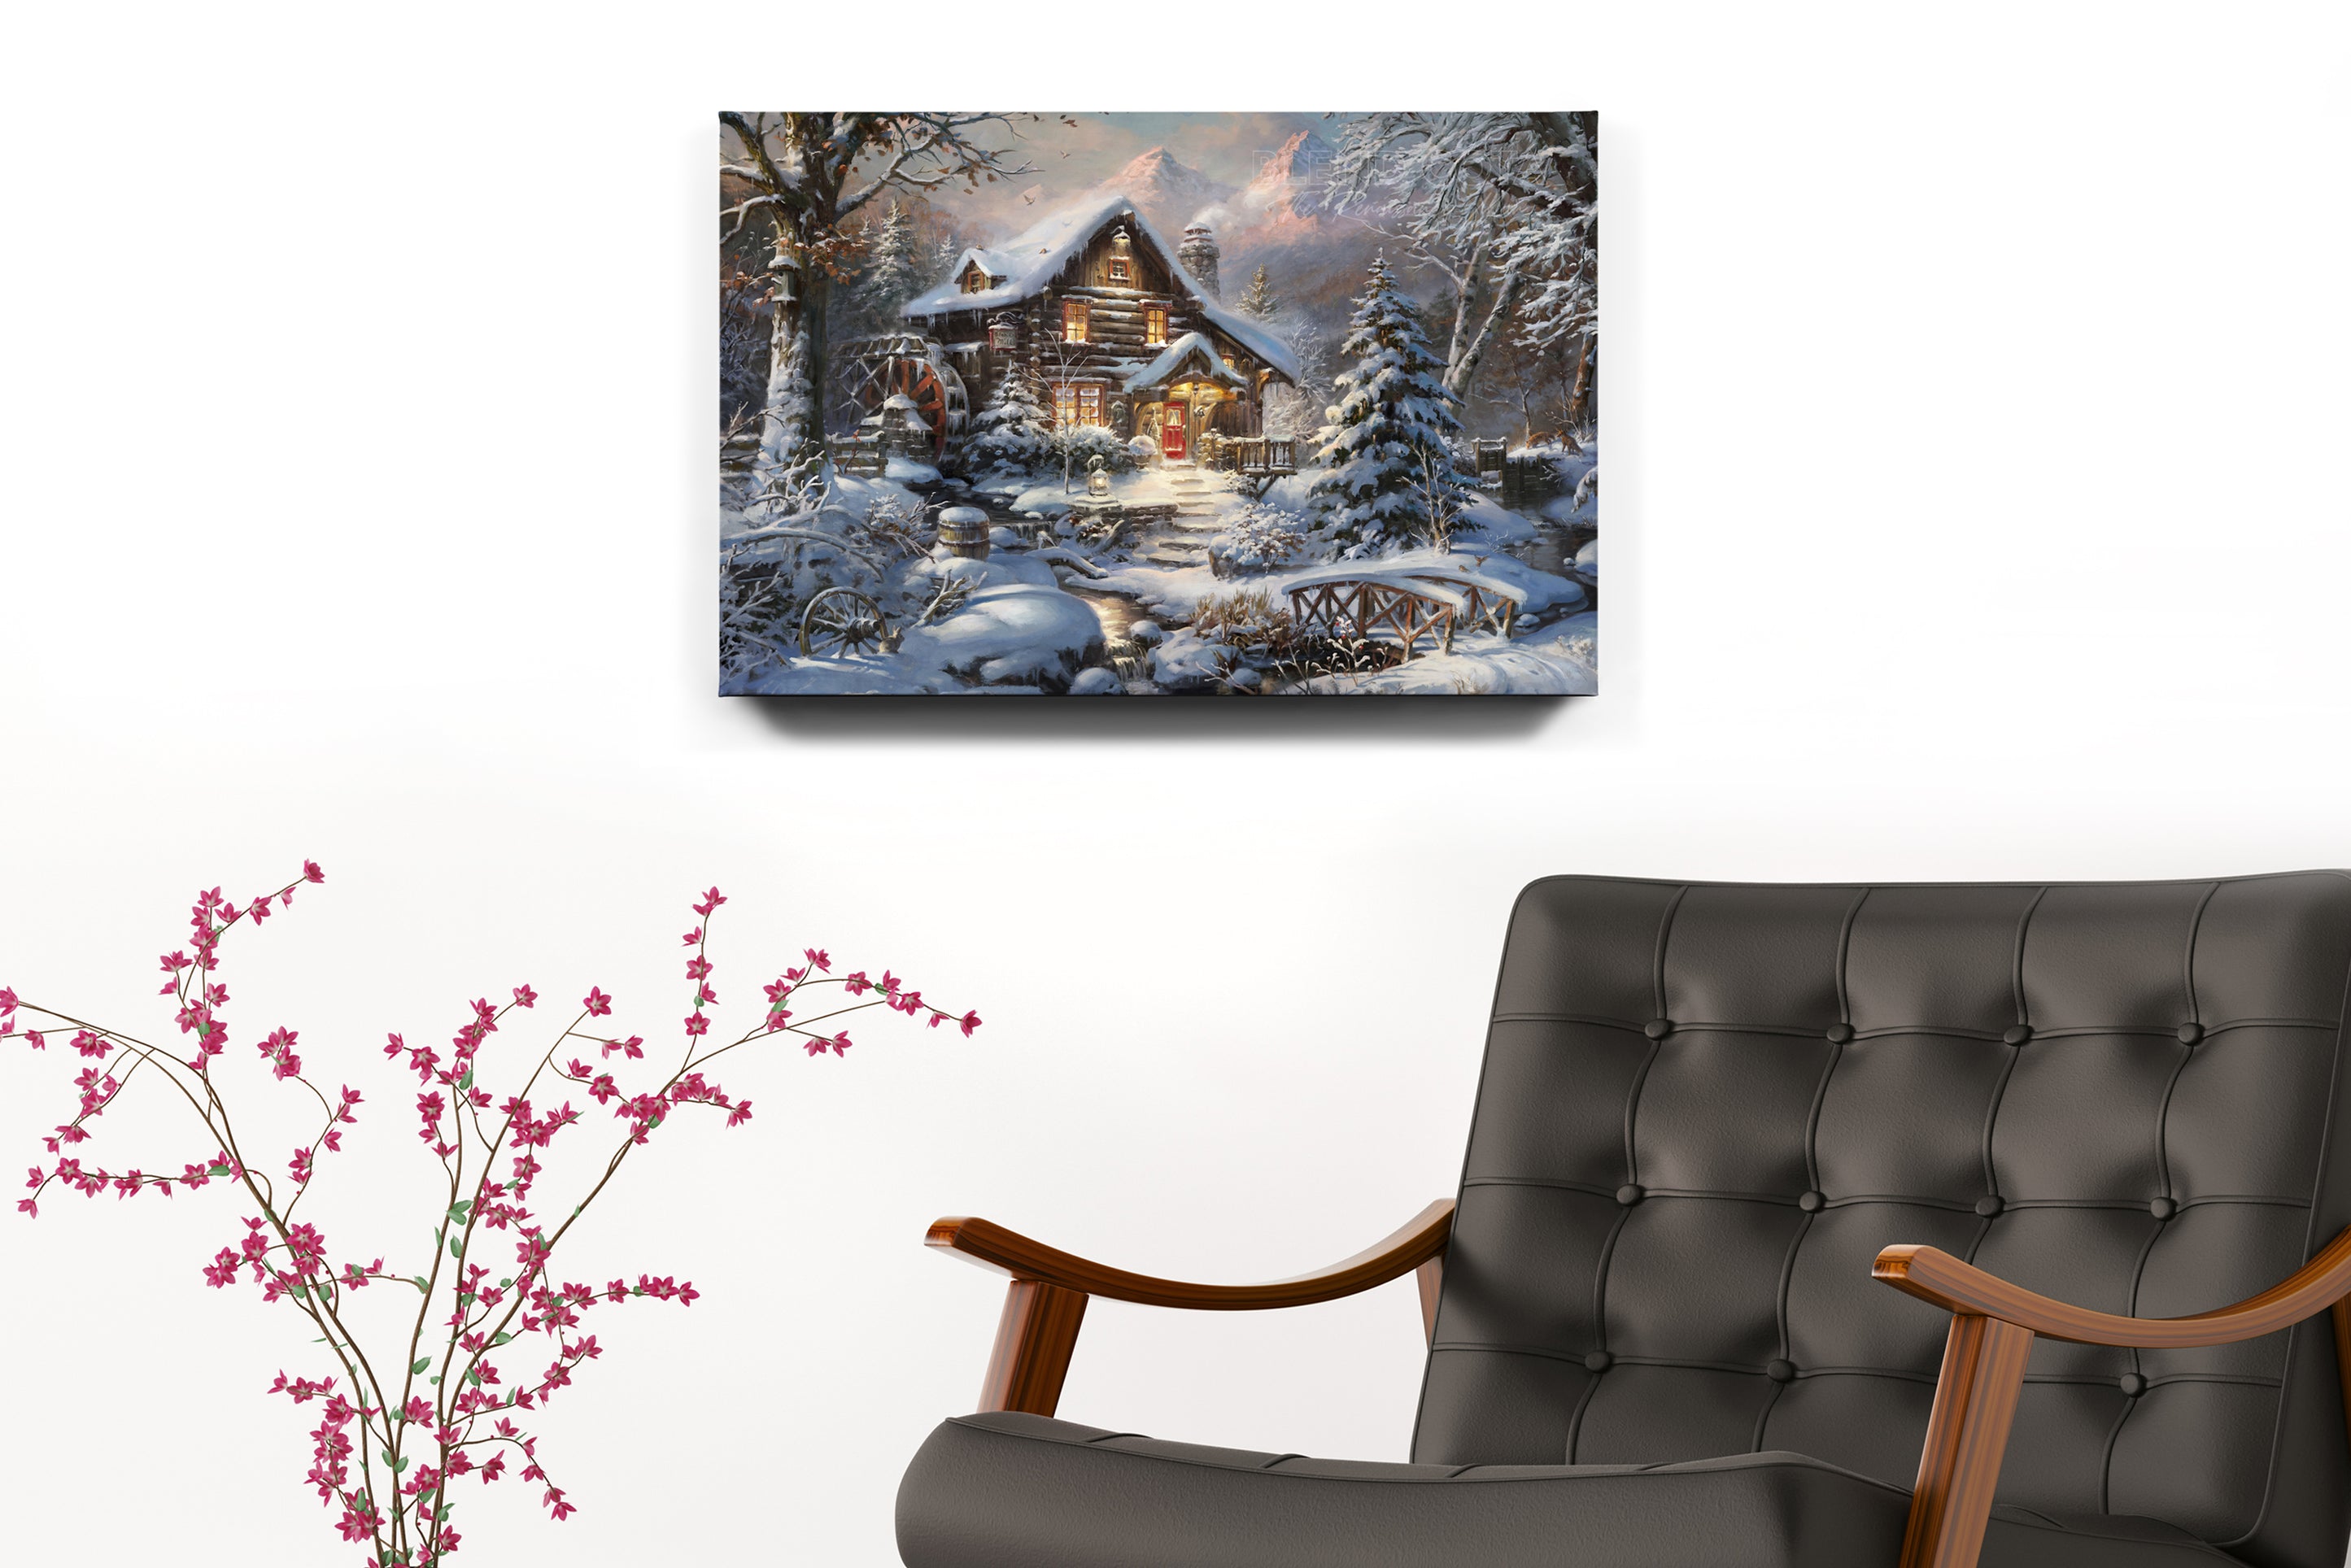 Silence of The First Snow - Blend Cota Art Print on Canvas - Blend Cota Studios painting hanging on white wall behind a black leather arm chair